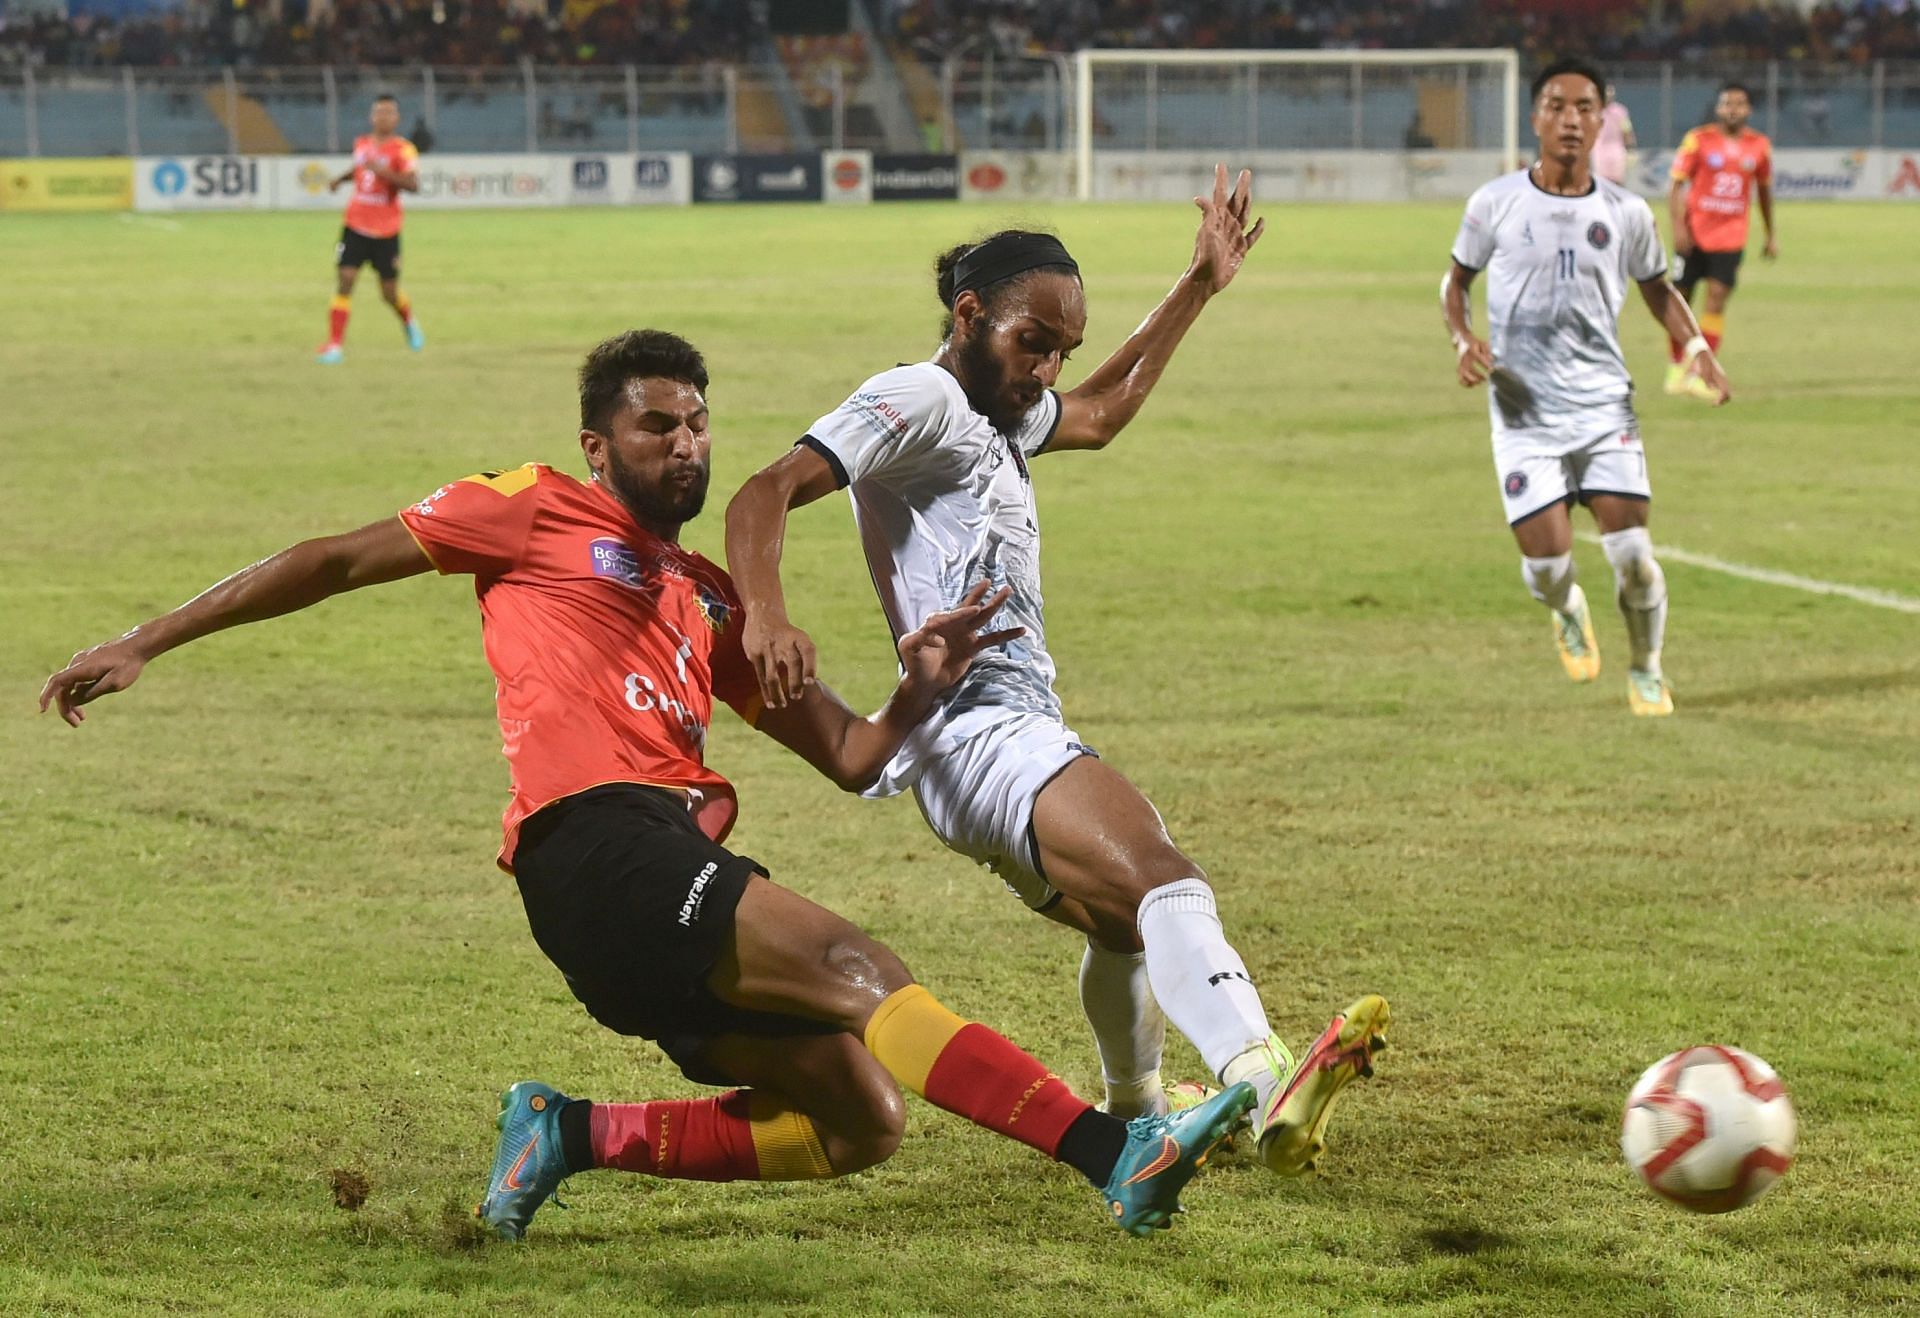 East Bengal and Rajasthan United played out an engaging draw. [Credits:Suman Chattopadhyay/www.imagesolutionr.in]